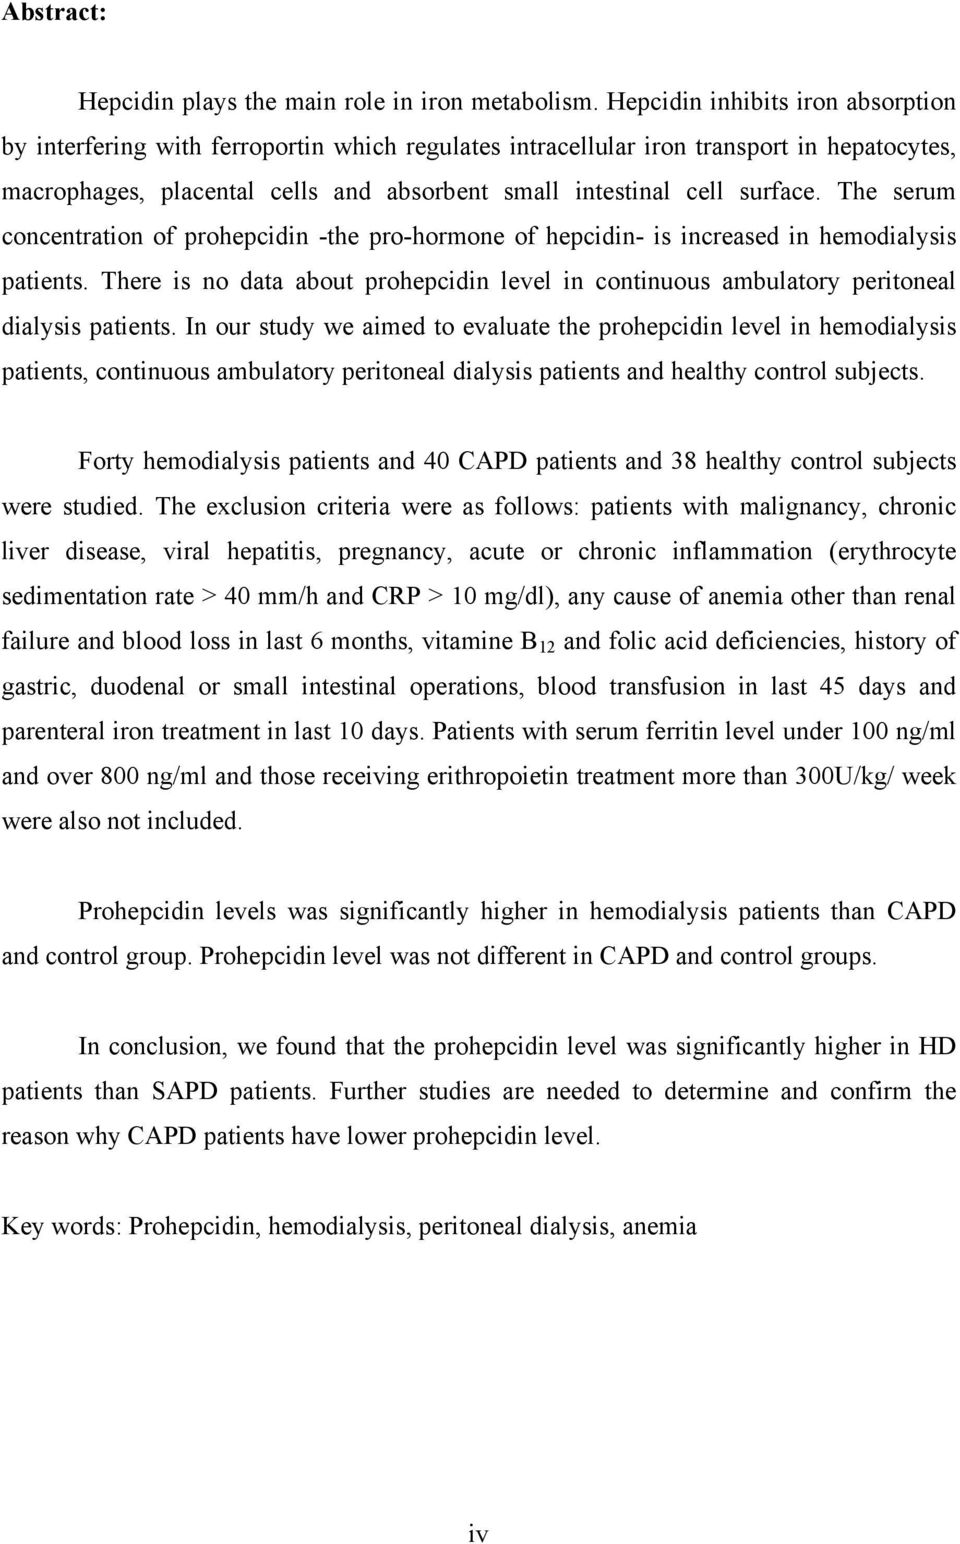 The serum concentration of prohepcidin -the pro-hormone of hepcidin- is increased in hemodialysis patients.